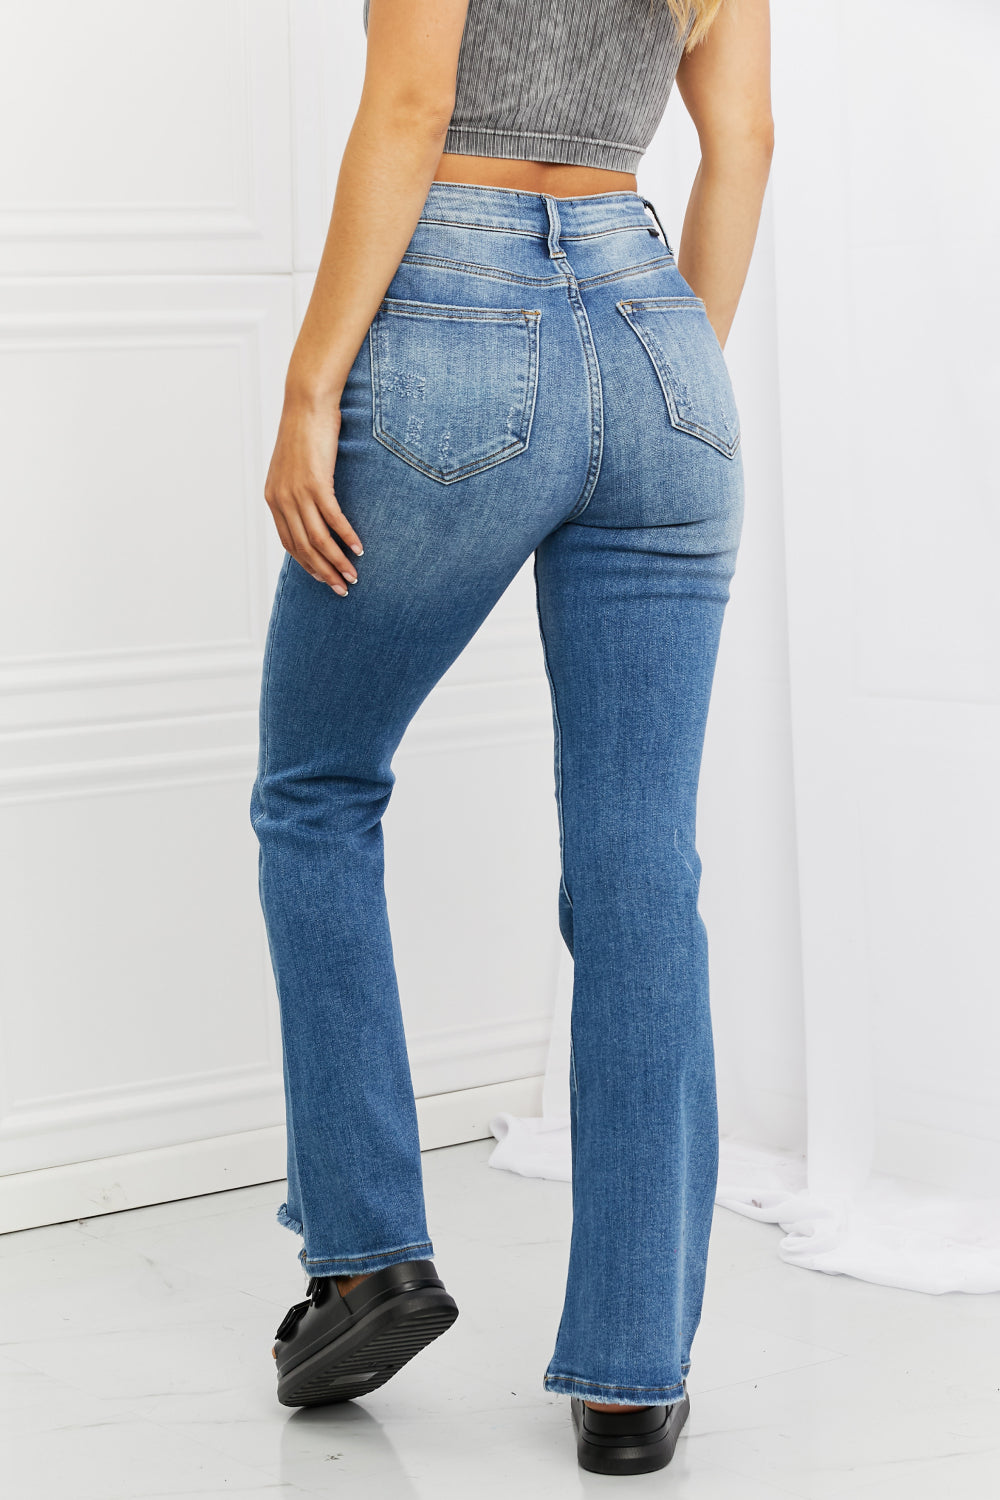 RISEN Full Size Iris High Waisted Flare Jeans - Lola Cerina Boutique